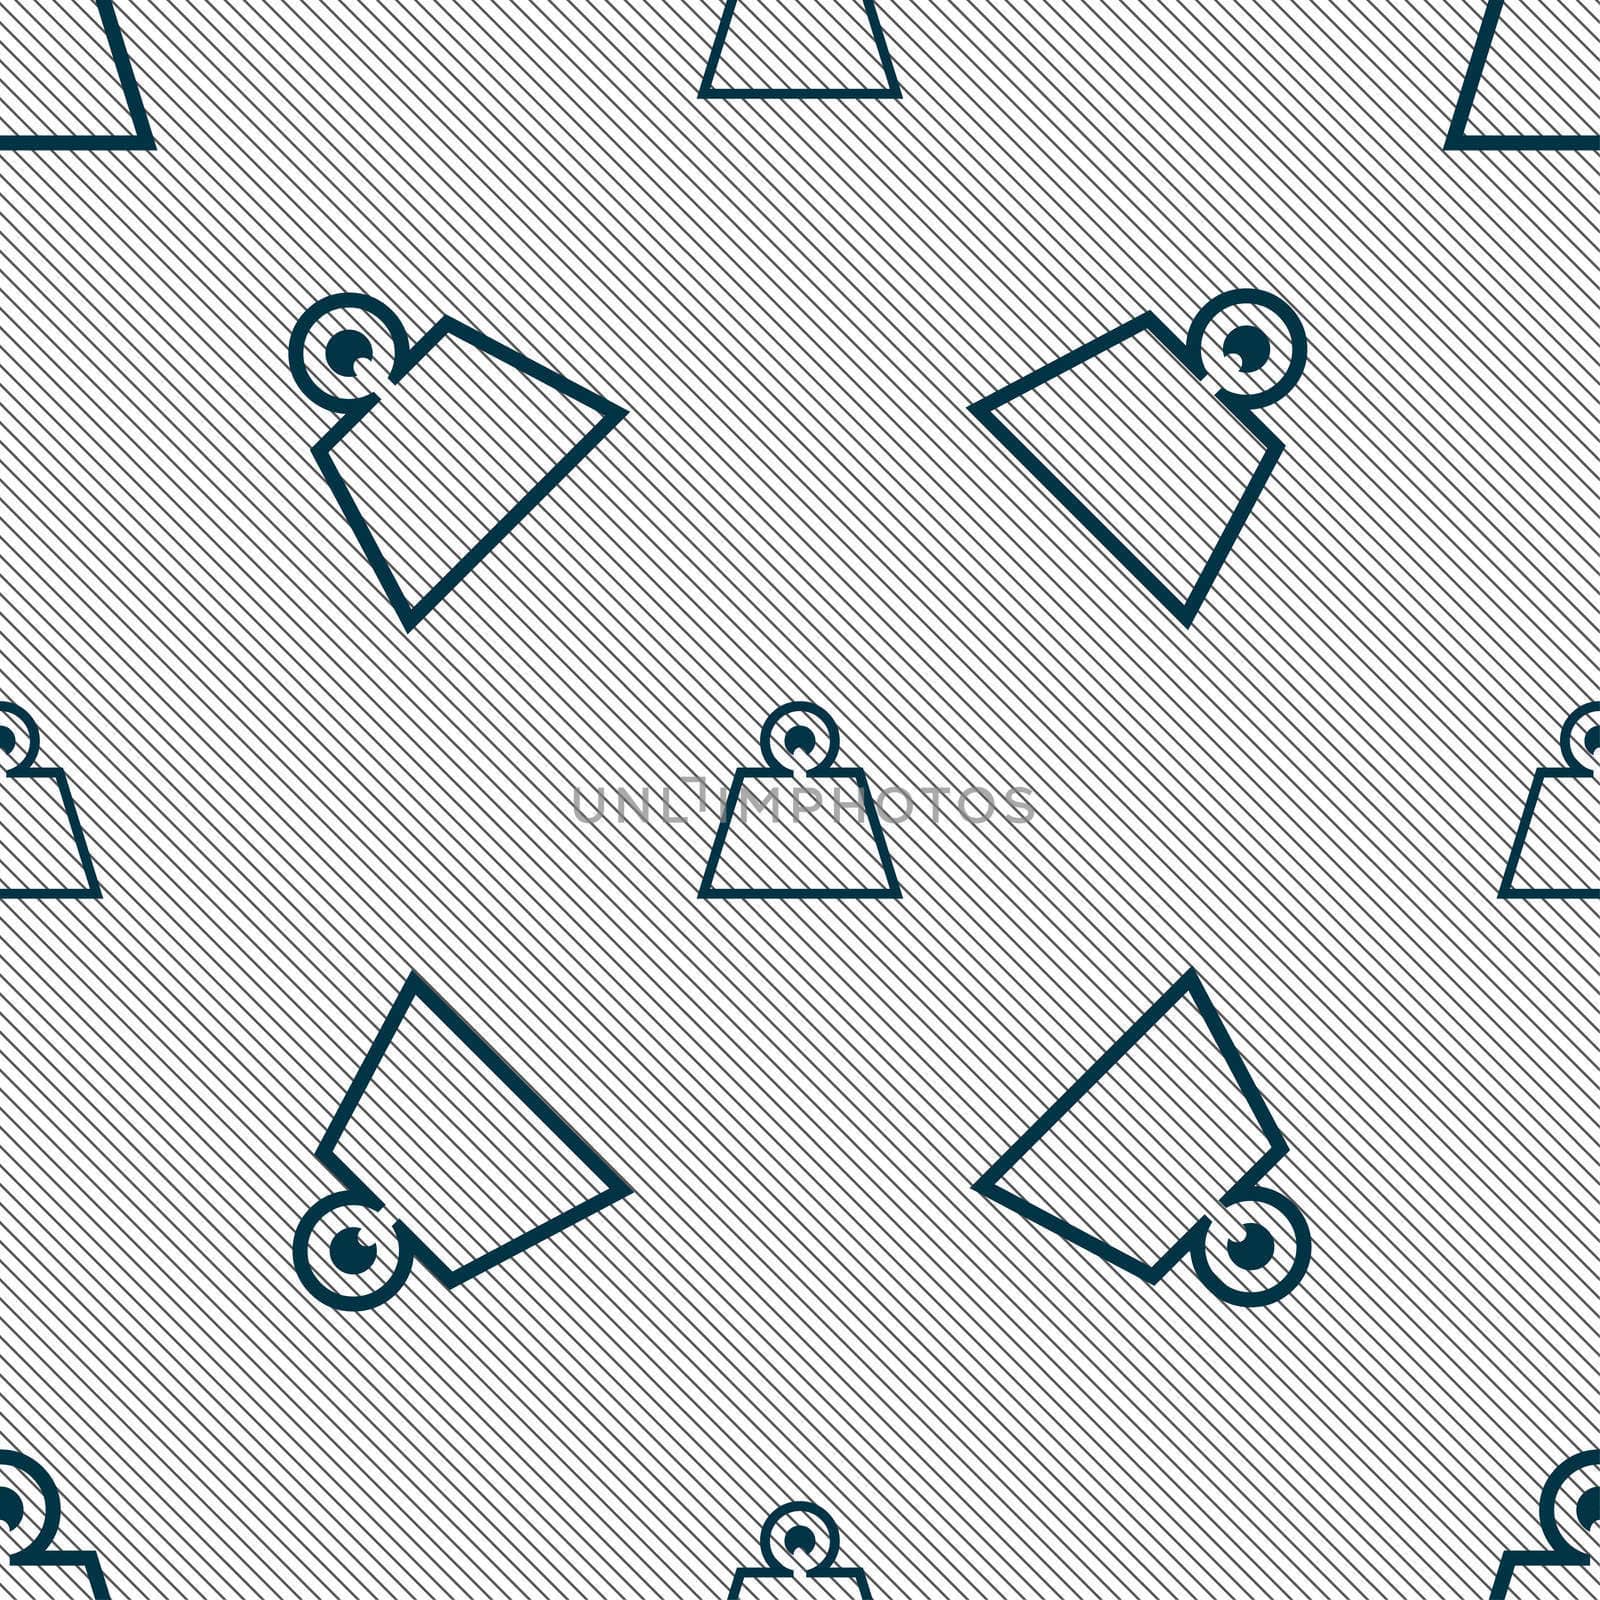 Weight icon sign. Seamless pattern with geometric texture. illustration